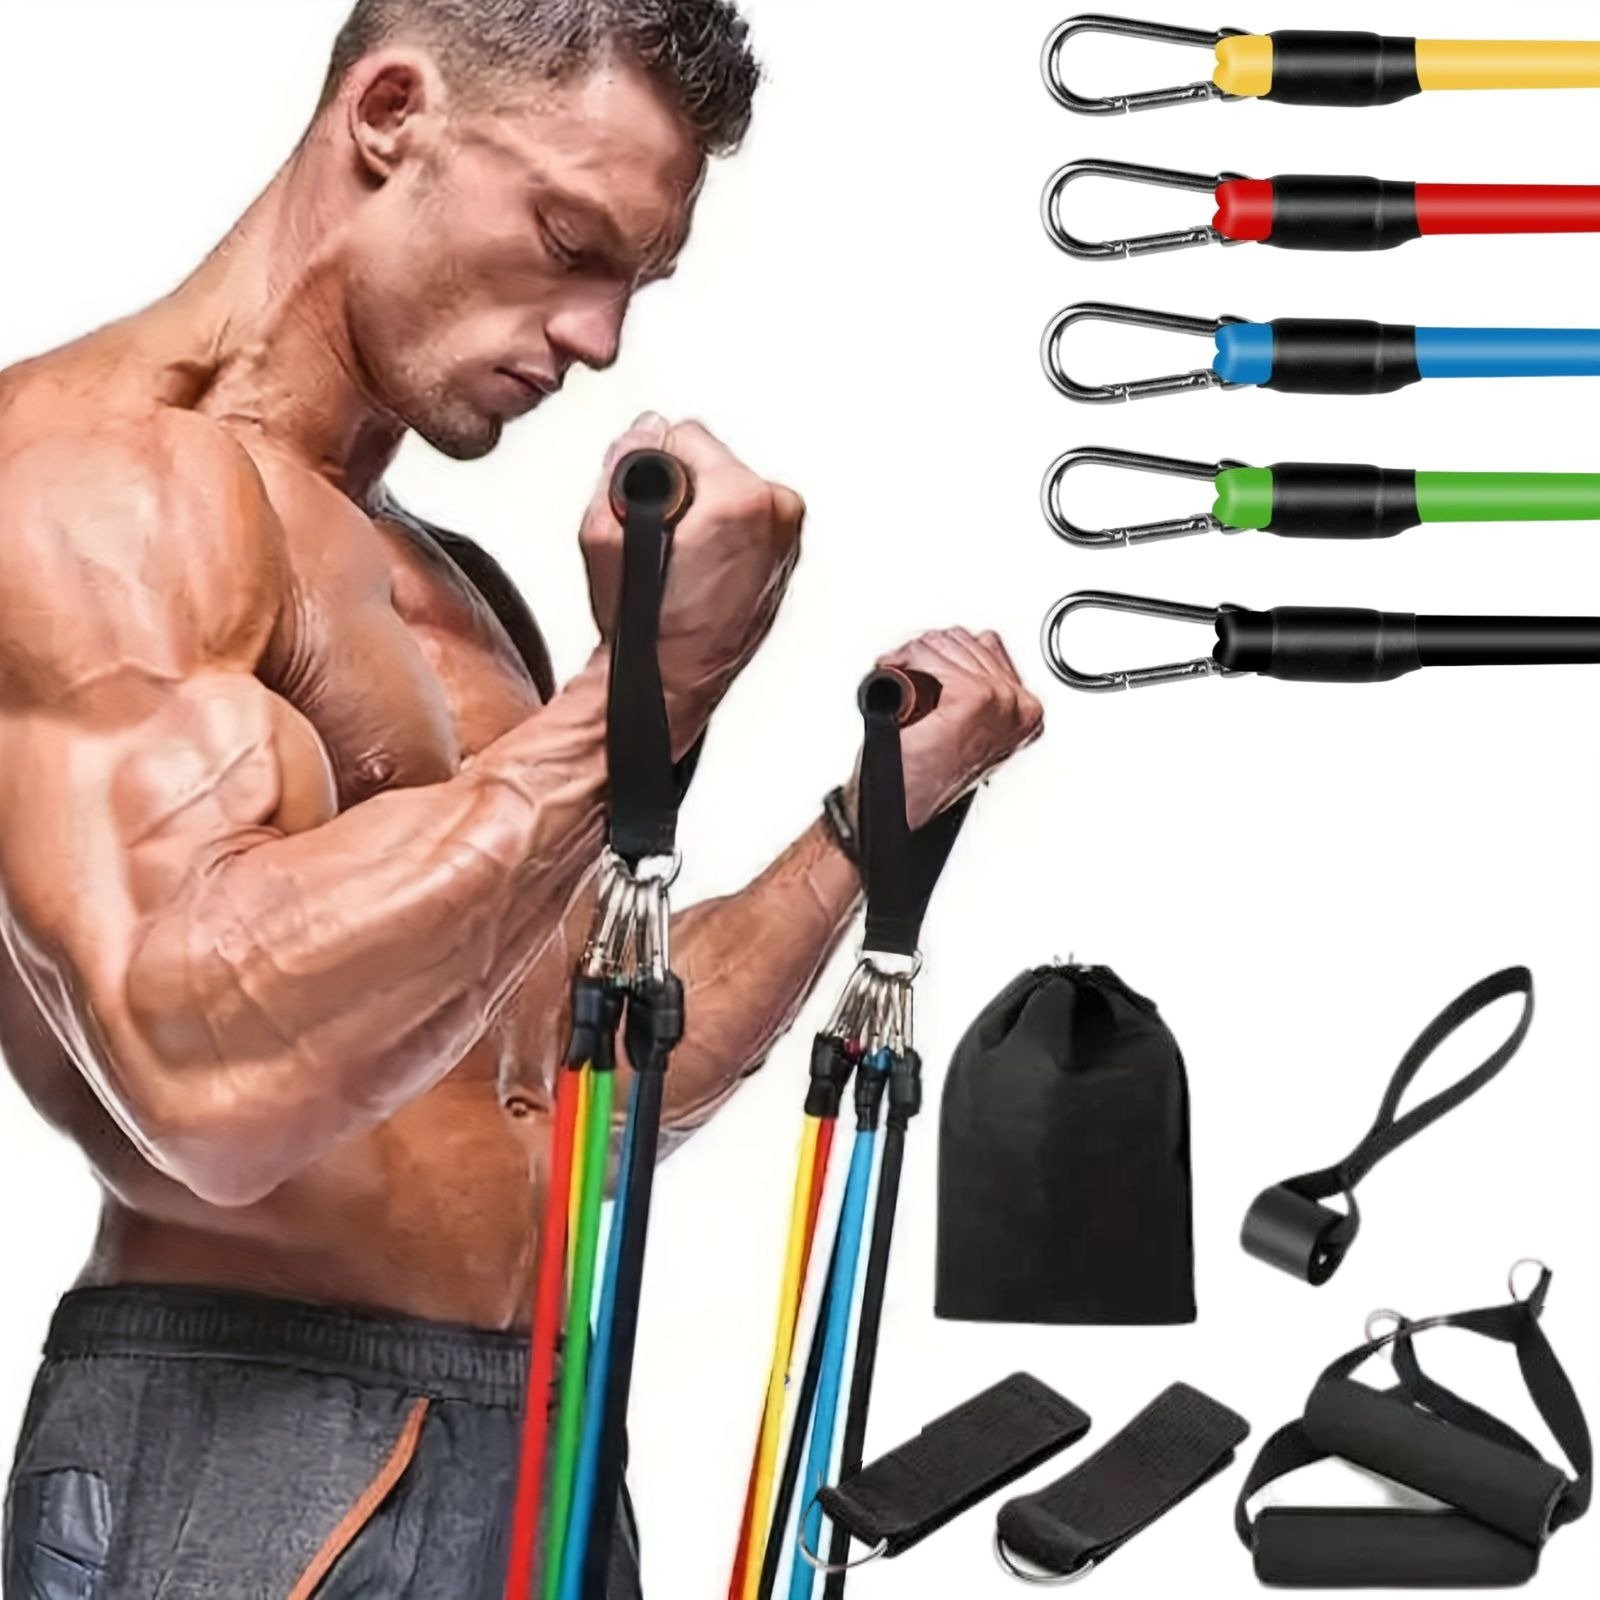 Whatafit Resistance Bands Set, Exercise Bands with Door Anchor, Handles,  Carry Bag, Legs Ankle Straps for Resistance Training, Physical Therapy,  Home